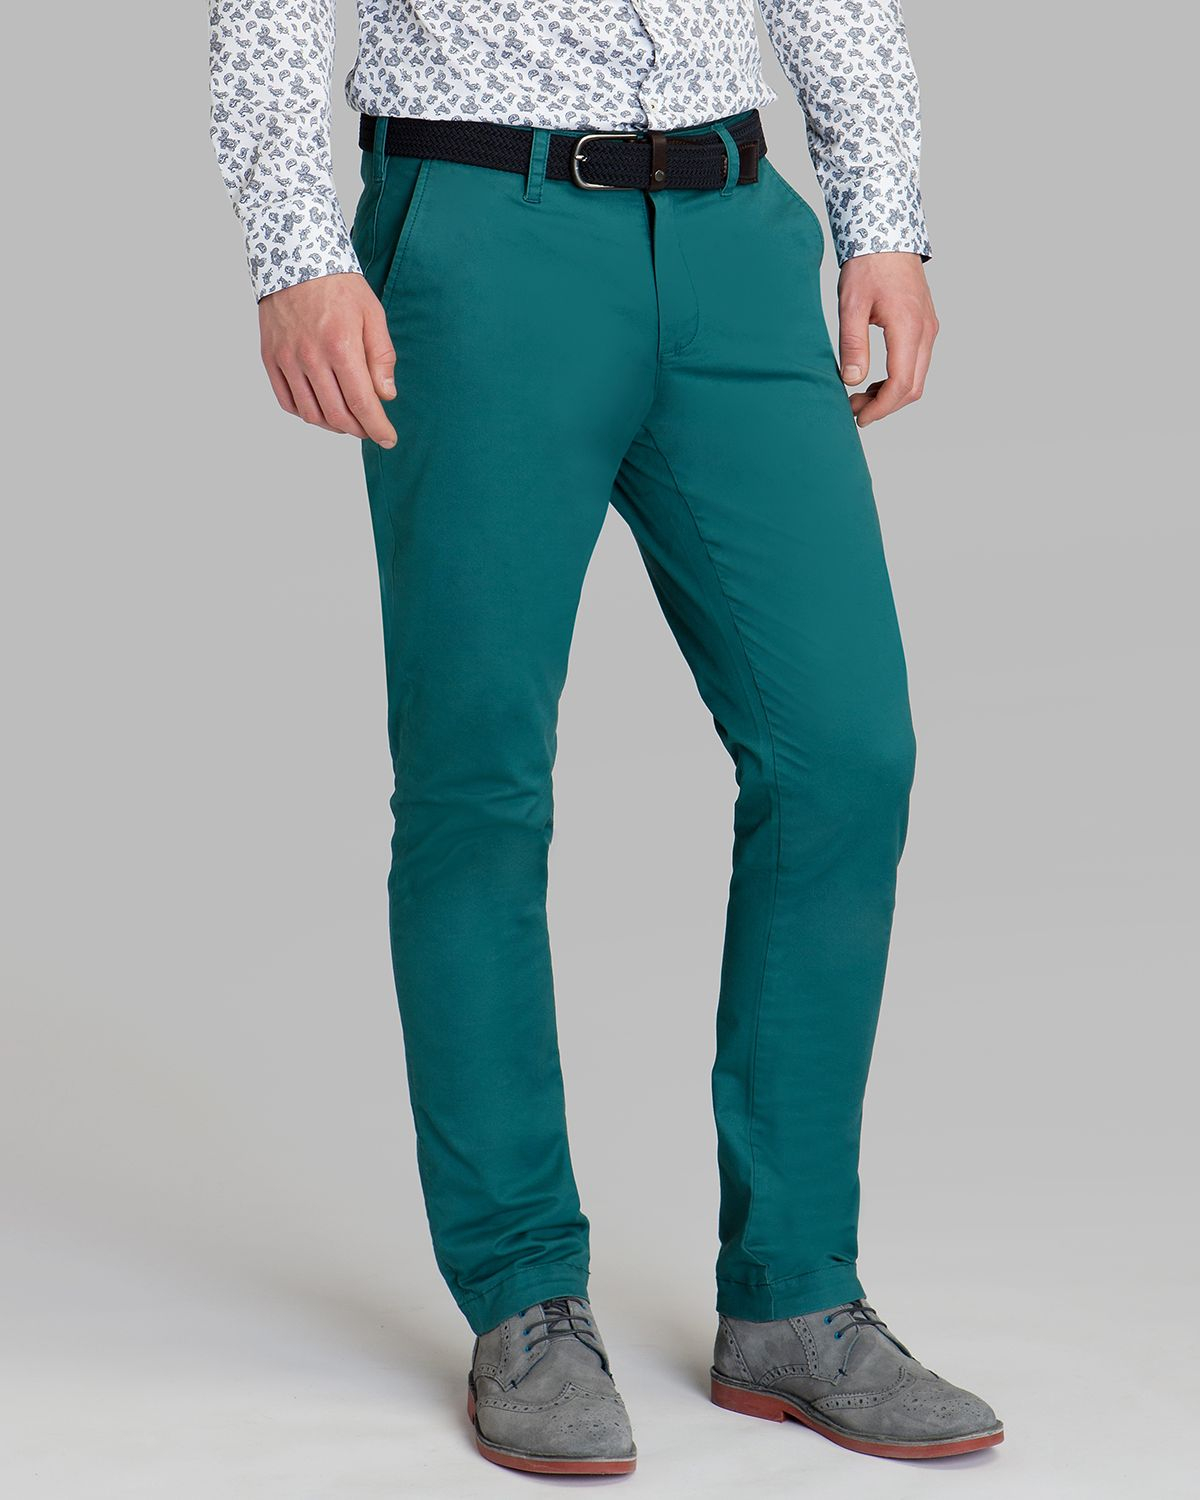 Lyst - Ted Baker Bronn Classic Fit Chino Pants in Blue for Men